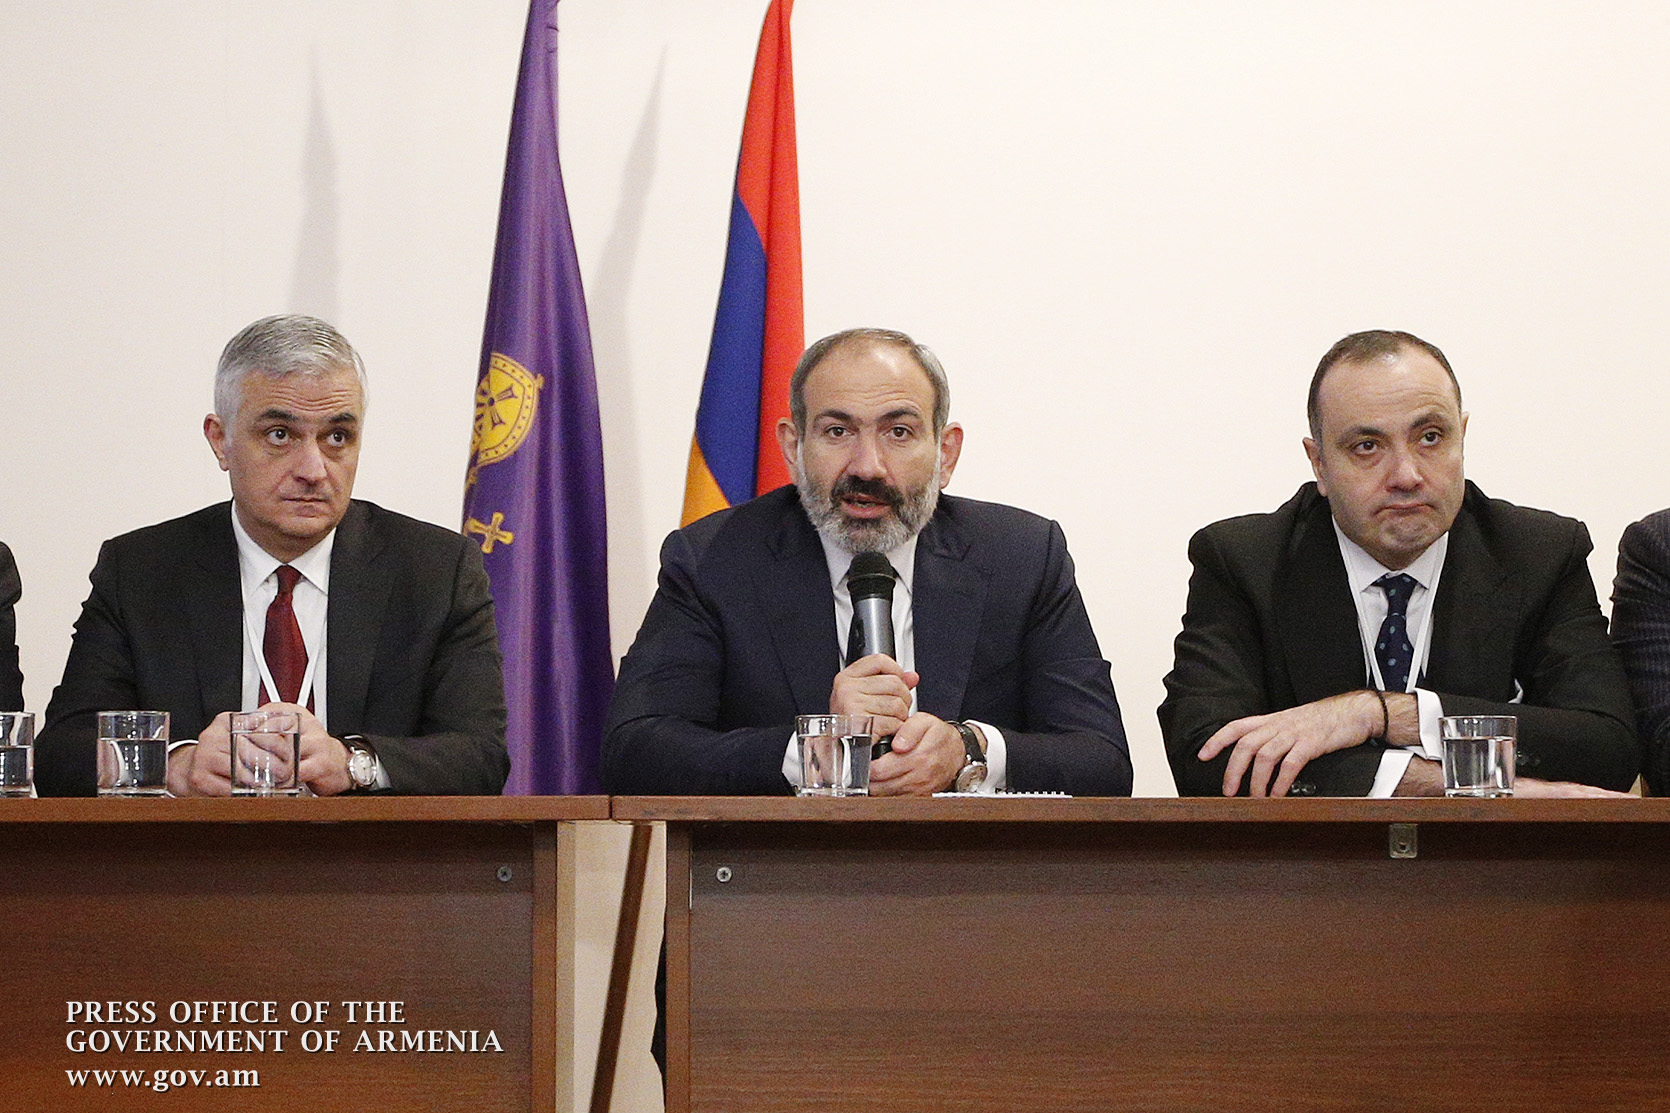 ‘The government’s task is to transform the political revolution into an economic revolution’ – Nikol Pashinyan meets with Armenian community in Saint Petersburg